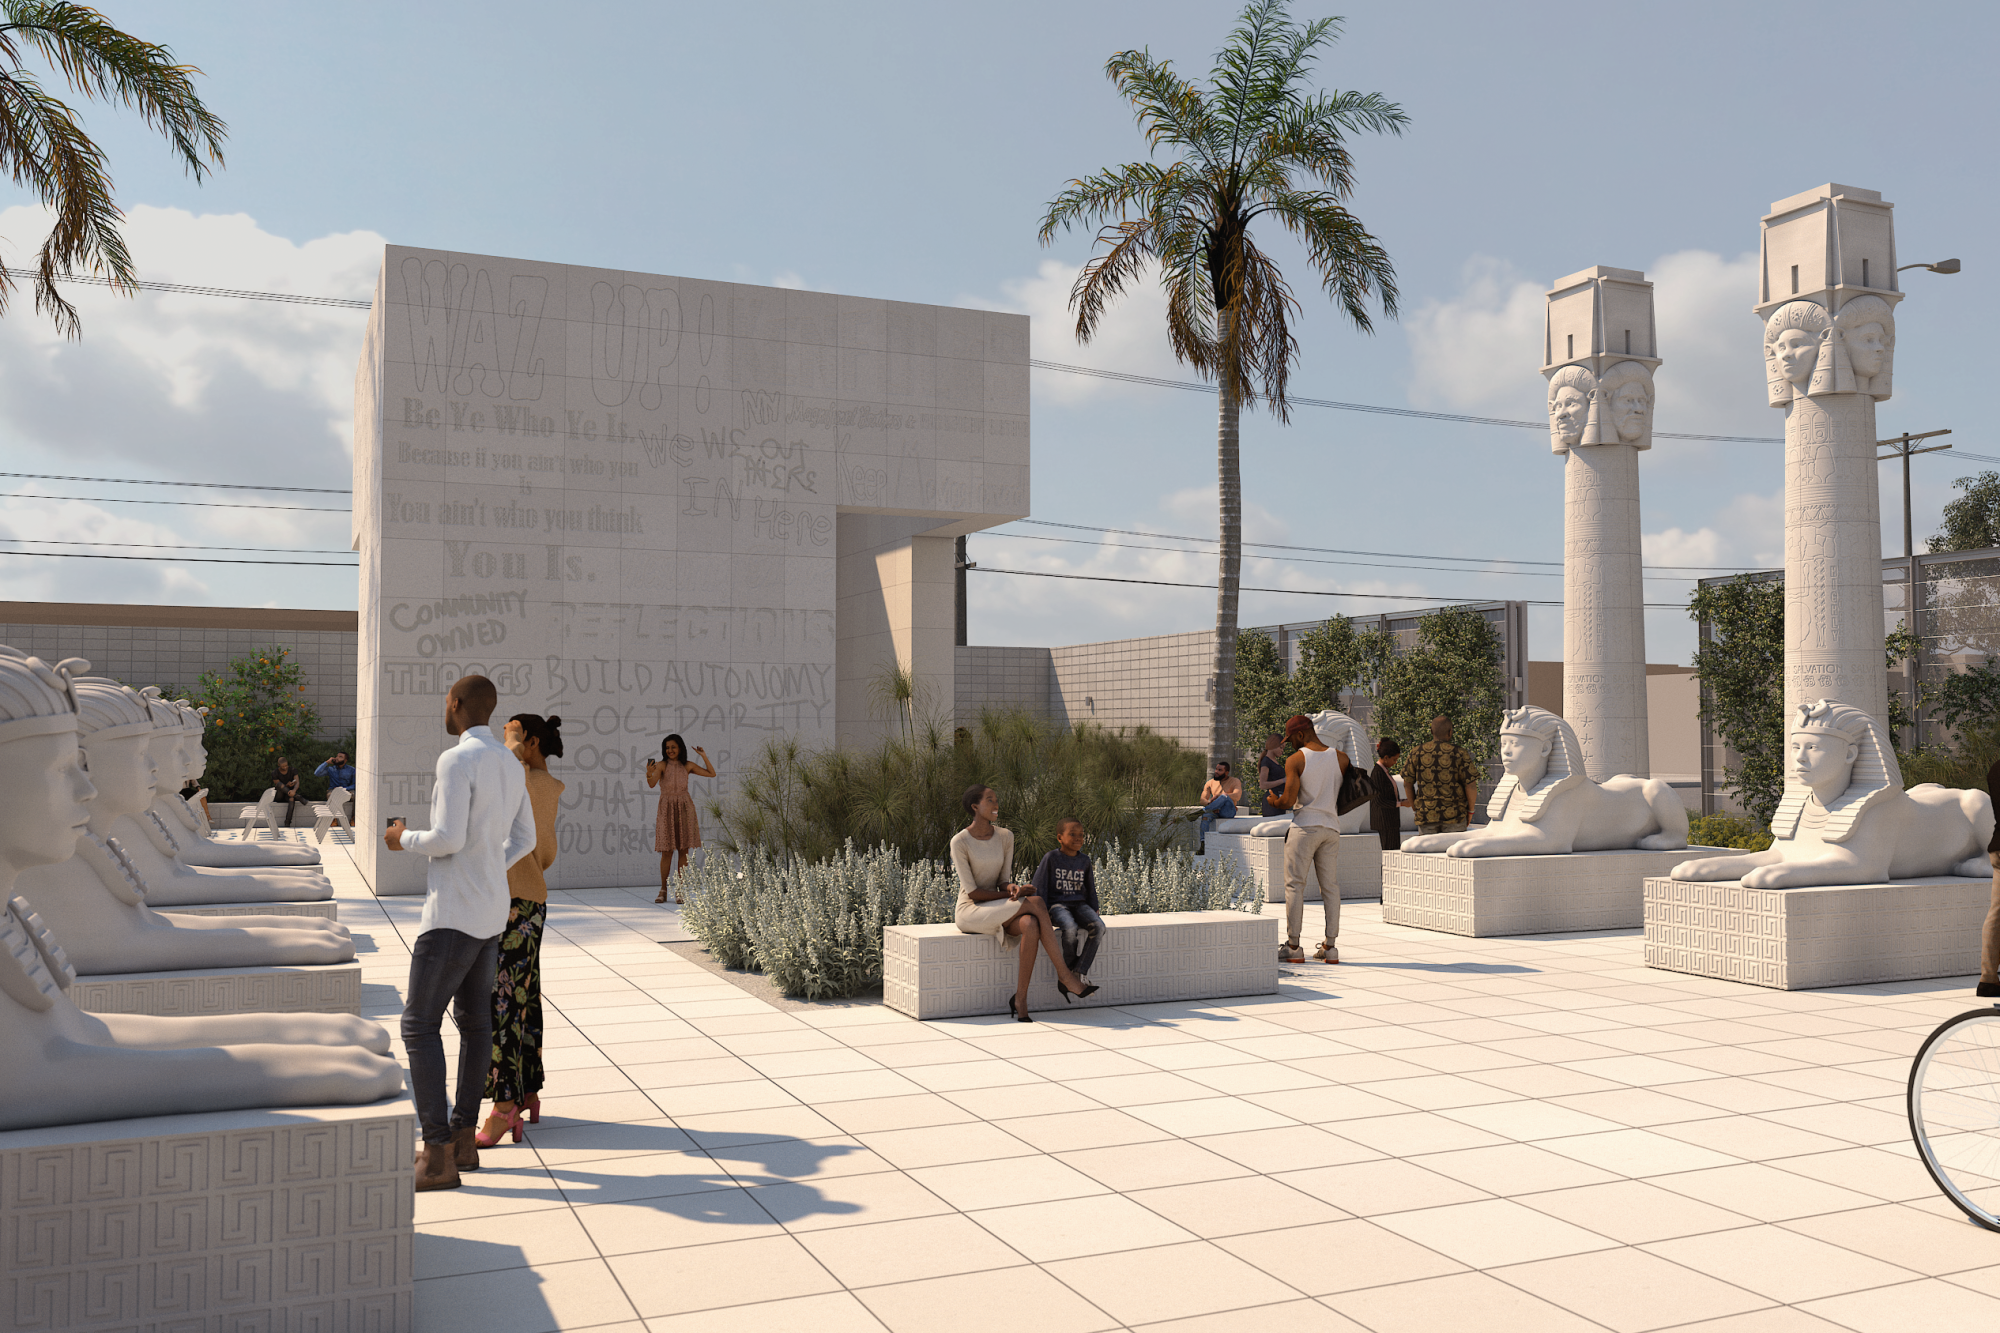 A rendering of Lauren Halsey's monumental sculpture park with sphinxes and columns.